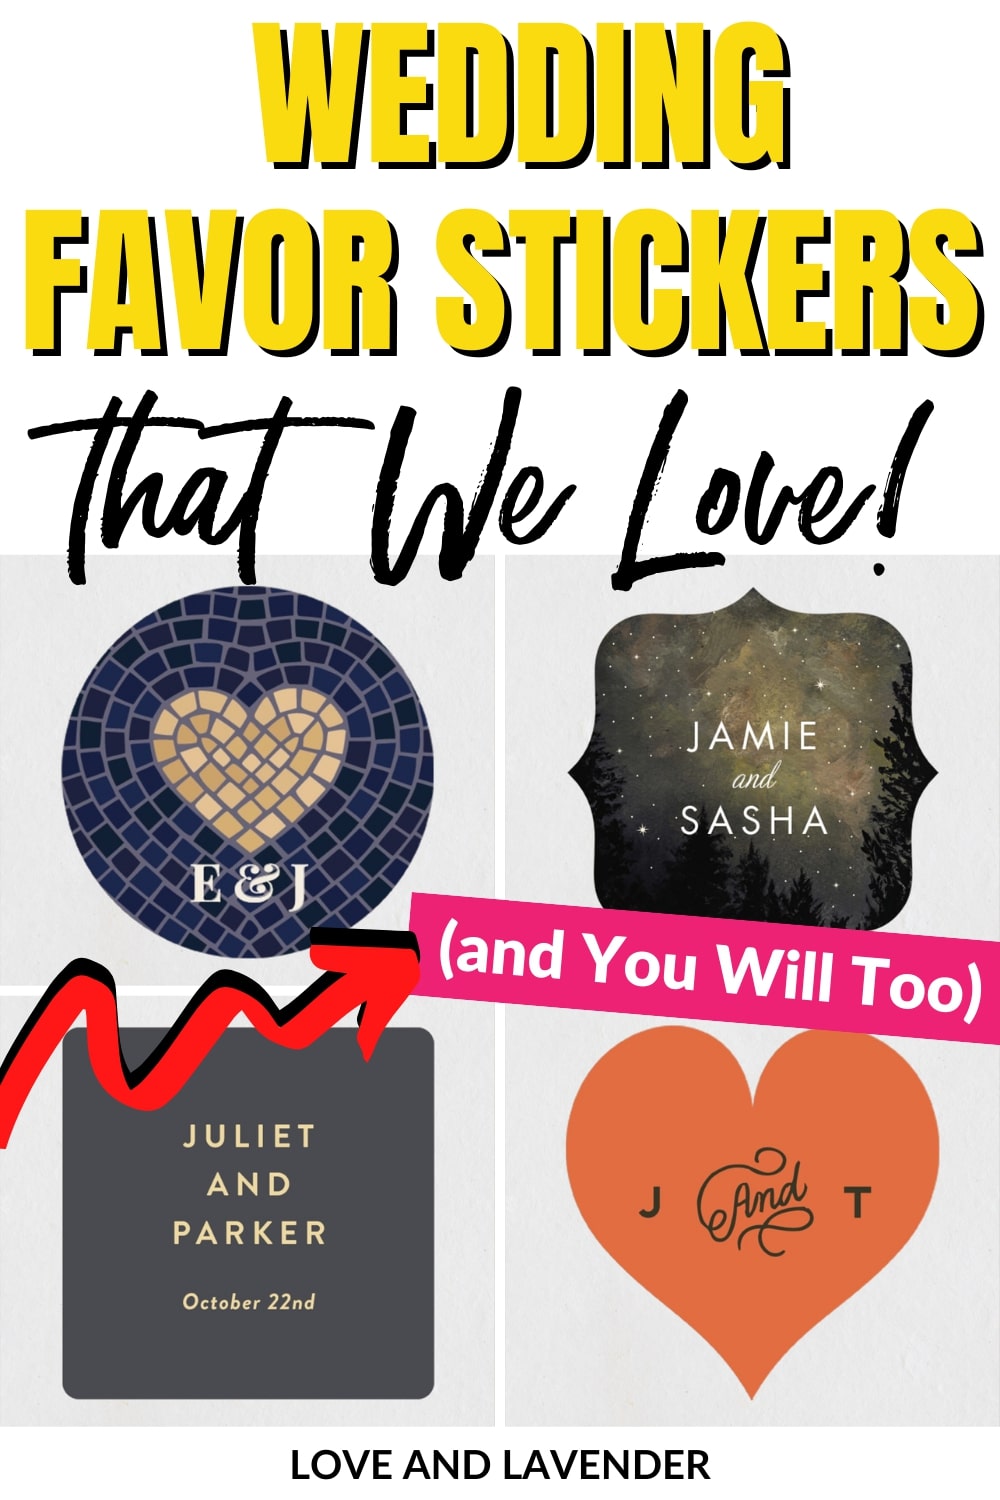 13 Wedding Favor Stickers that We Love! (and You Will Too)